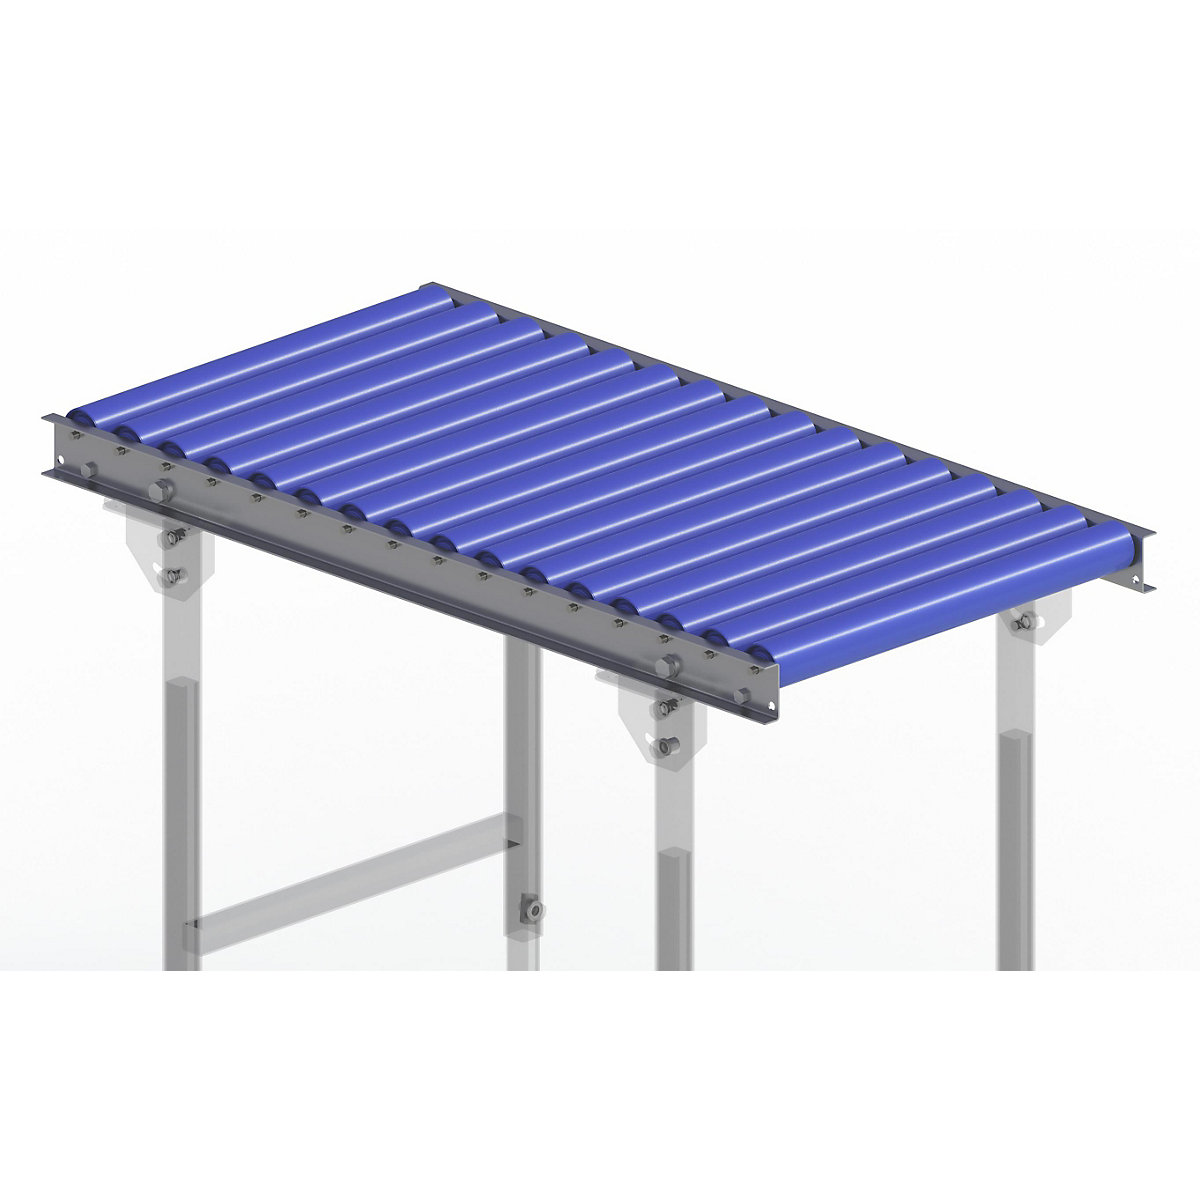 Gura – Light duty roller conveyor, steel frame with plastic rollers, track width 500 mm, axle spacing 62.5 mm, length 1 m